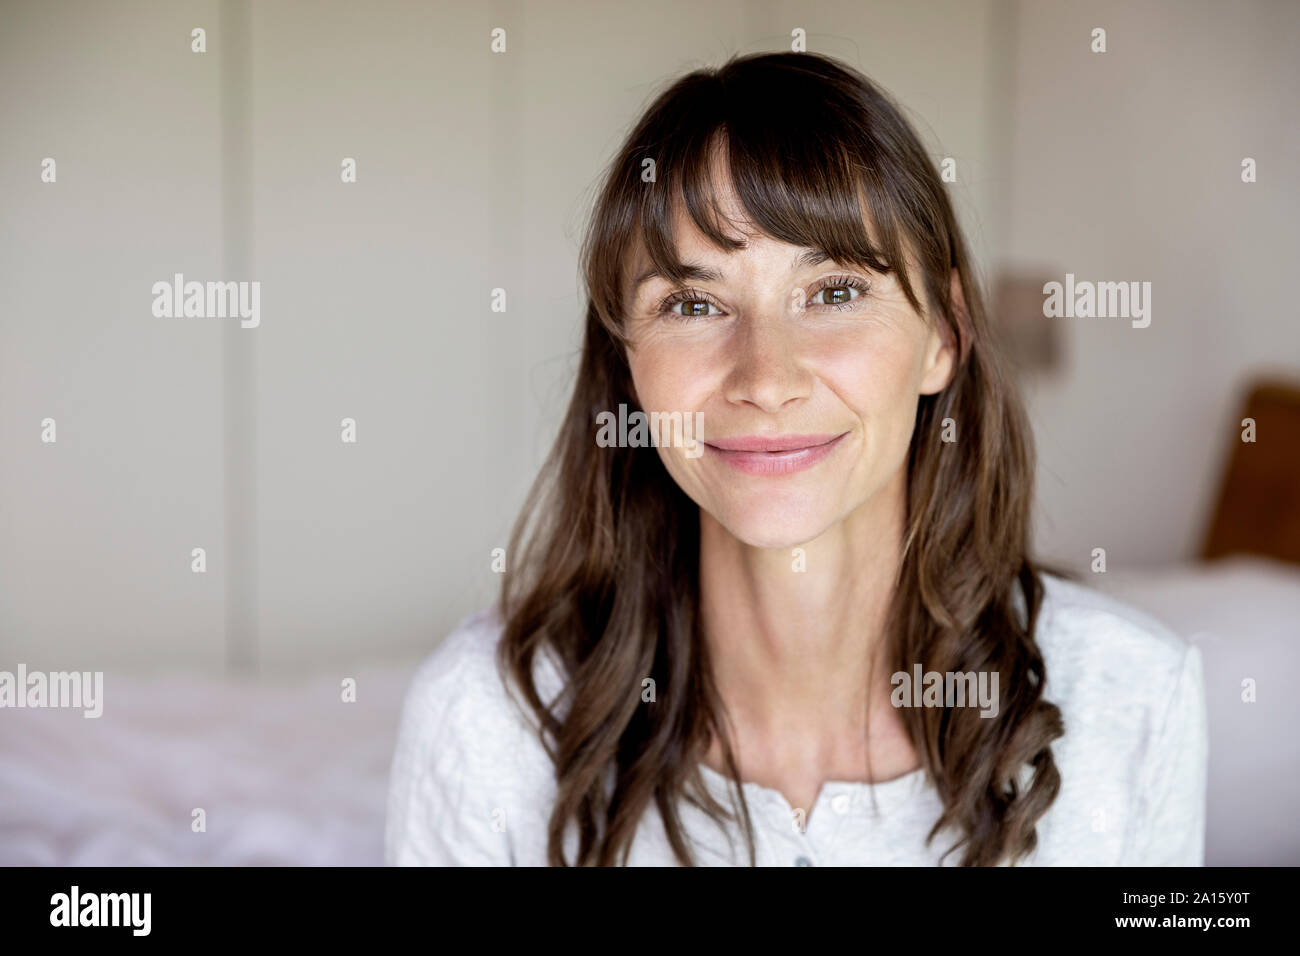 Portrait of smiling woman at home Stock Photo